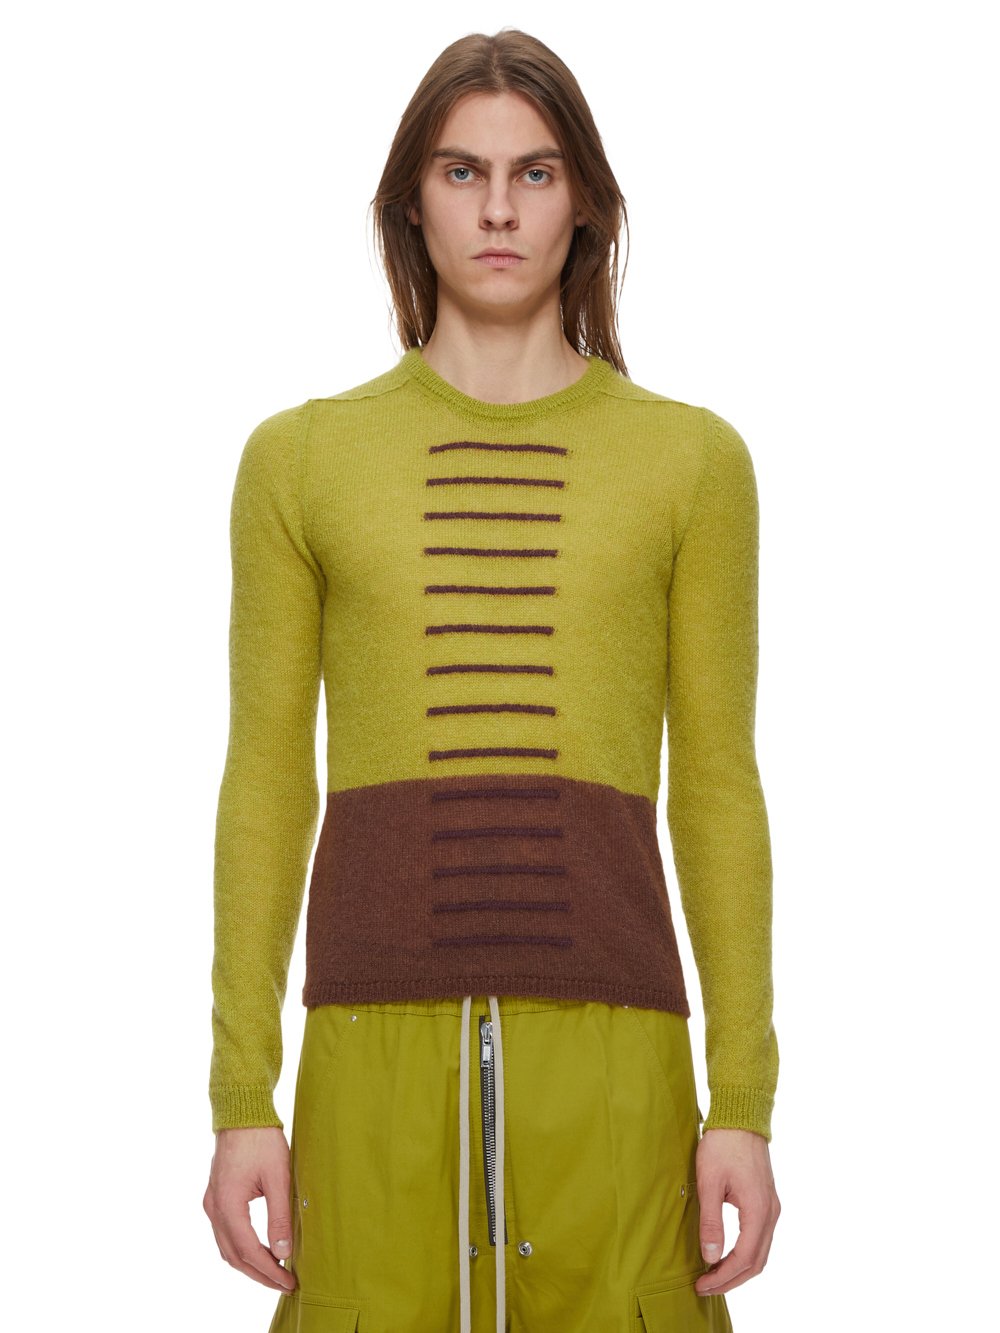 RICK OWENS FW23 LUXOR JUDD IN ACID, BROWN AND AMETHYST JUDD KNIT